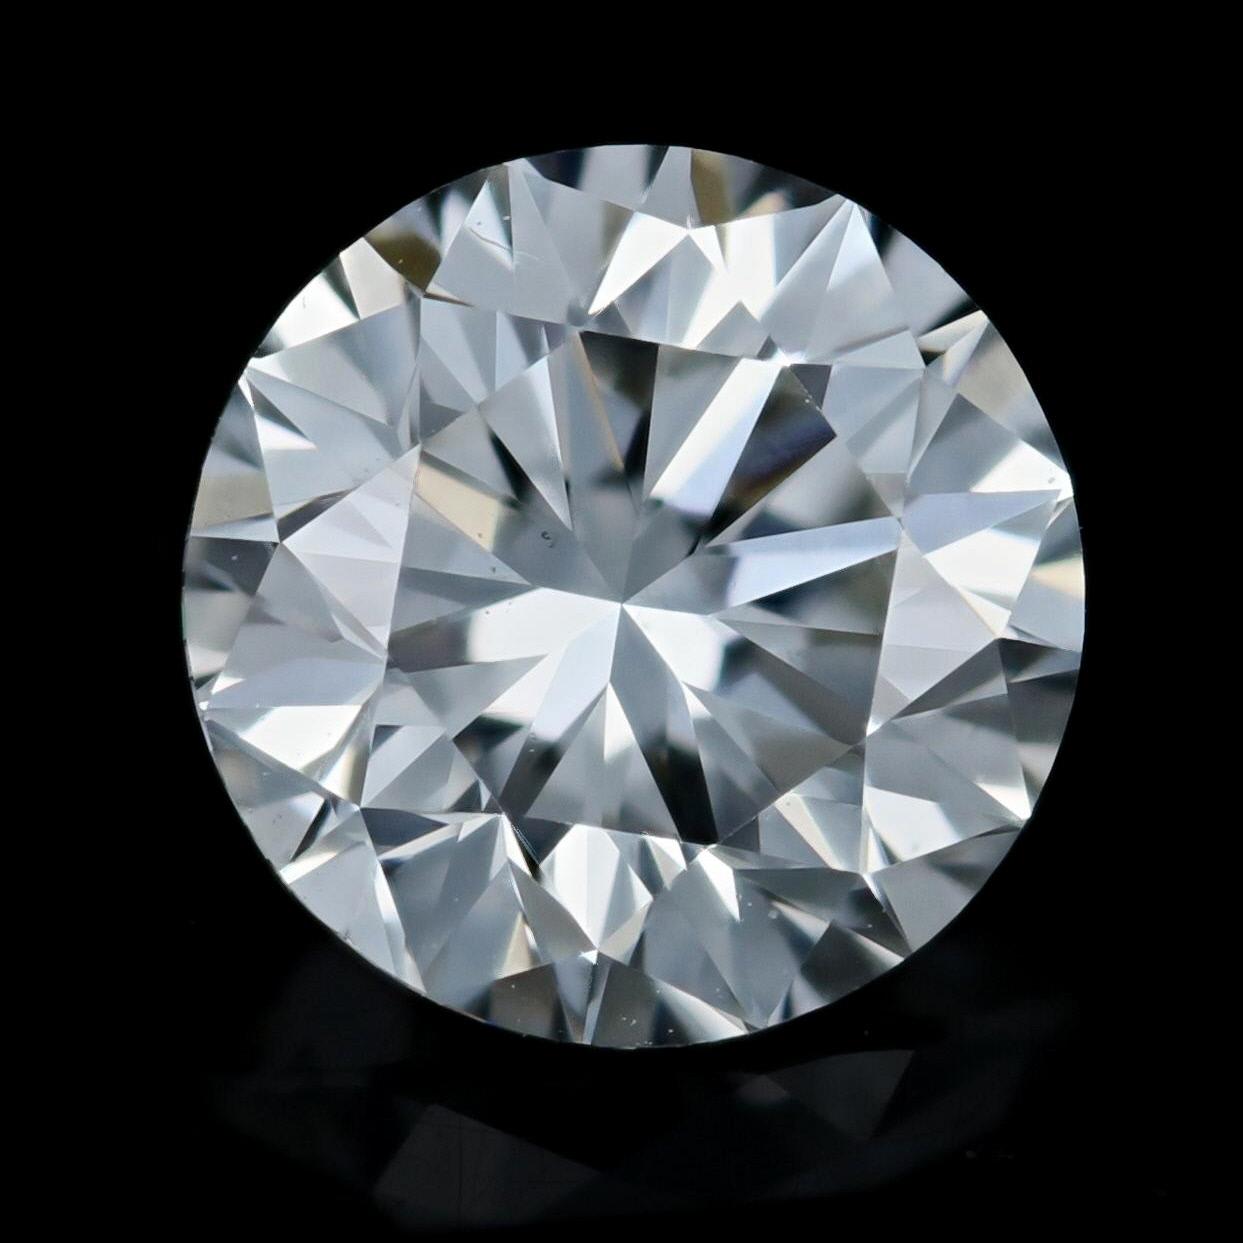 Weight: 1.09ct
Cut: Round Brilliant 
Color: H   
Clarity: VS2 
Dimensions (mm): 6.43 - 6.46 x 4.17 

GIA Report Number: 5172171685 

Condition: New  

Please check out the enlarged pictures.

Thank you for taking the time to read our description. If